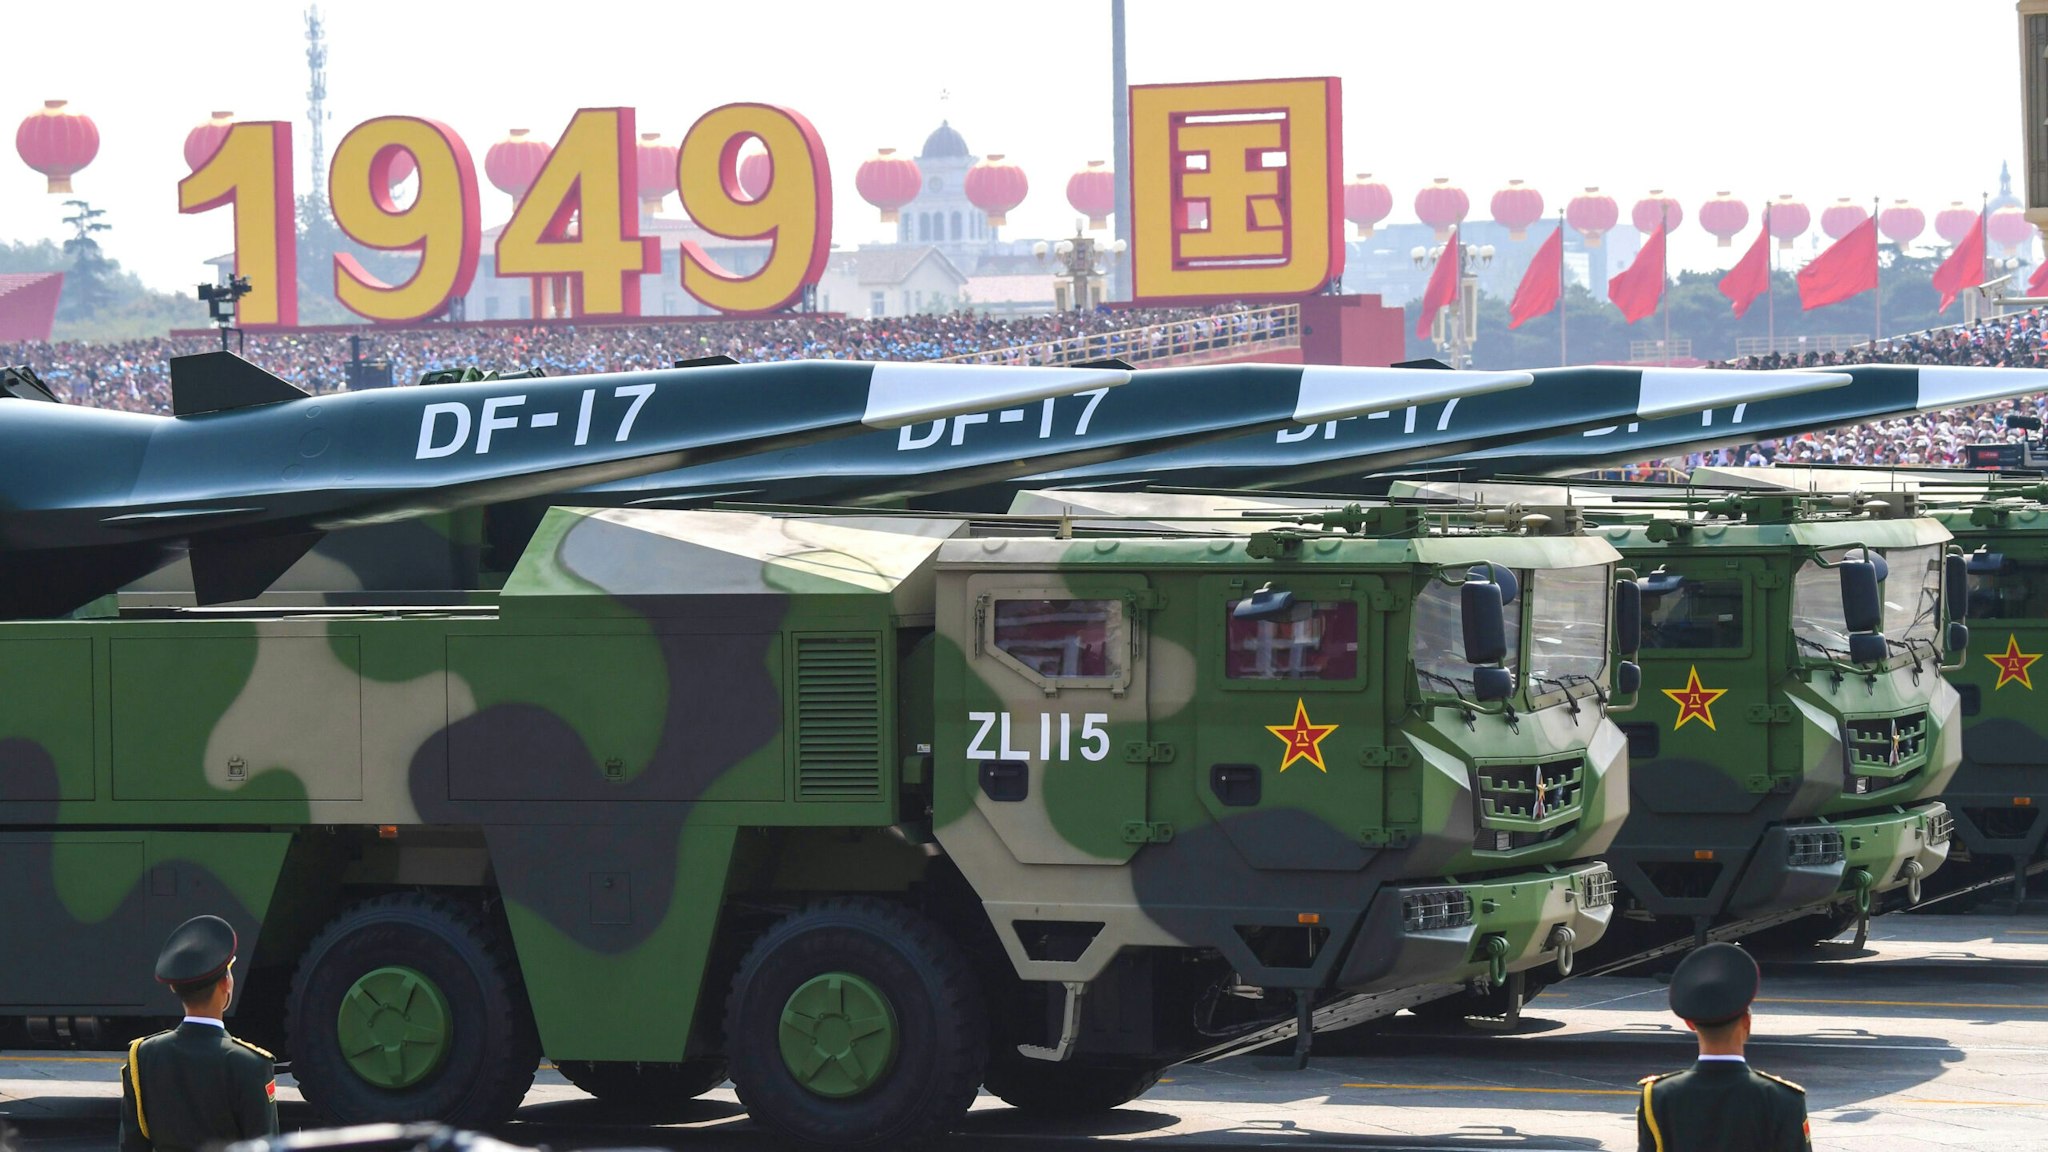 Military vehicles carrying DF-17 missiles participate in a military parade at Tiananmen Square in Beijing on October 1, 2019, to mark the 70th anniversary of the founding of the Peoples Republic of China.